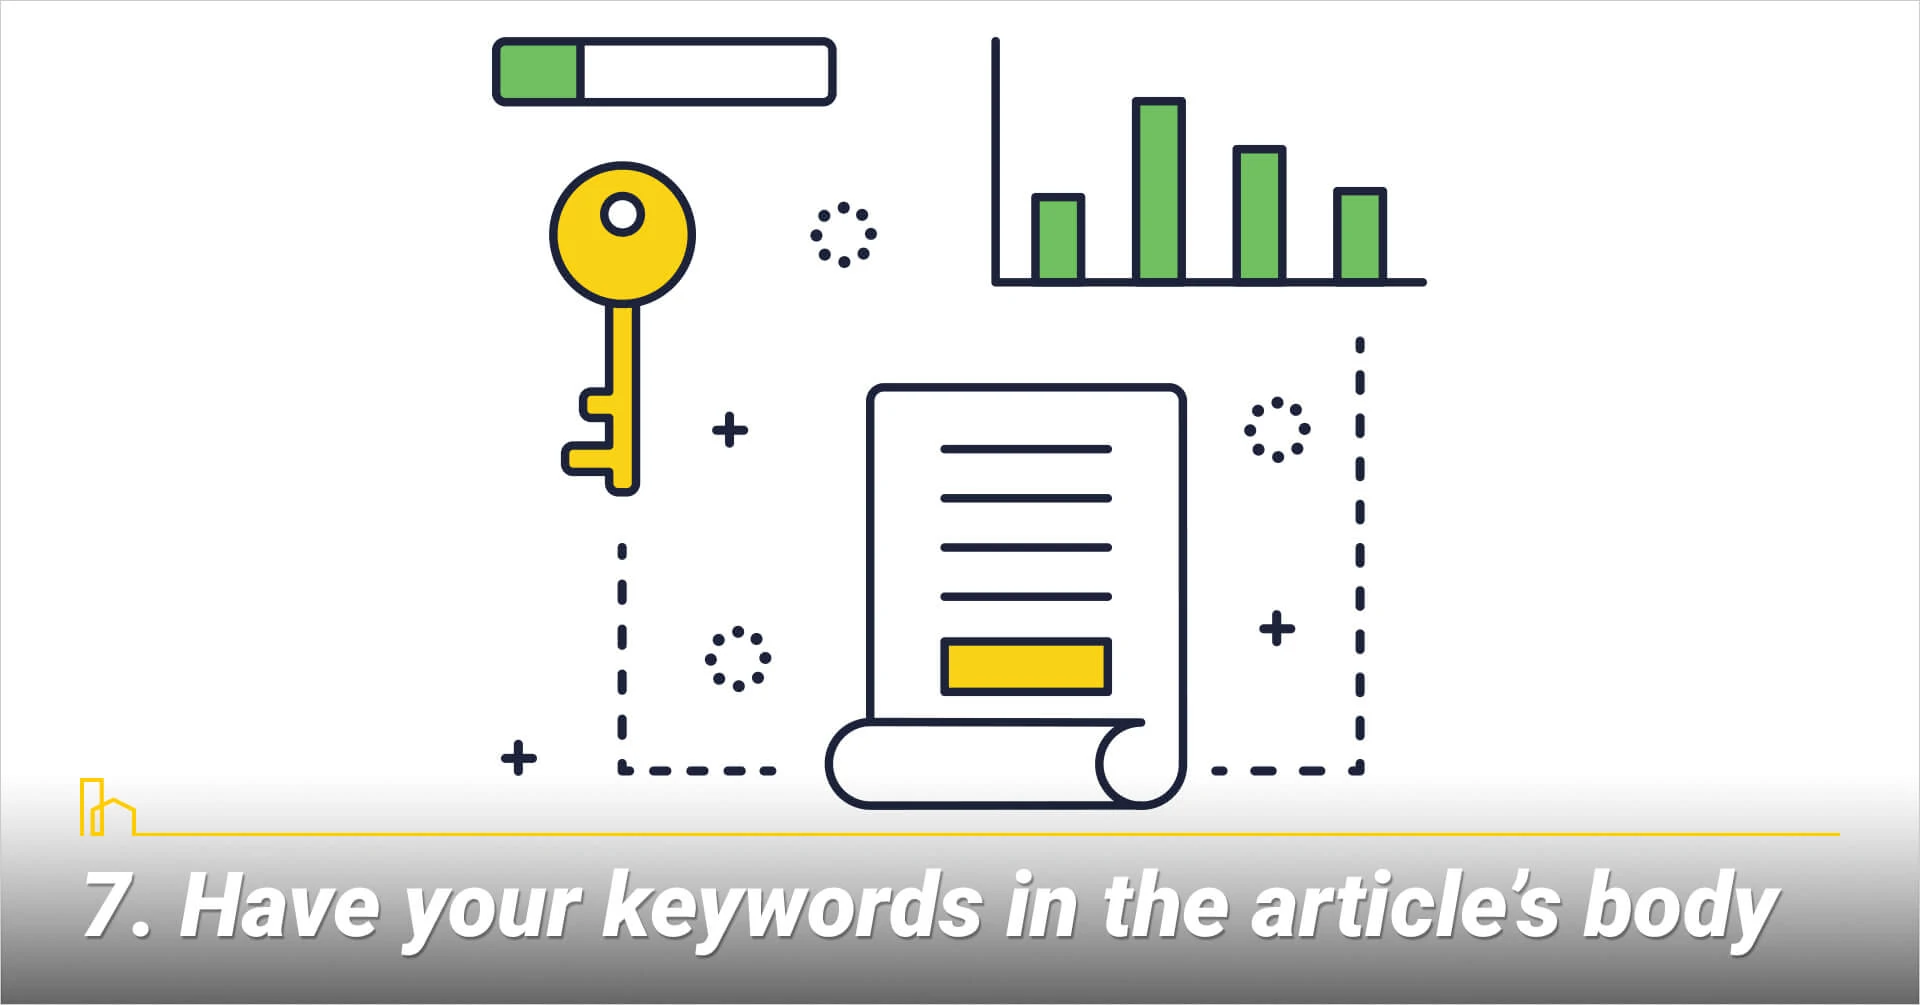 Have your keywords in the article's body, incorporating keywords in your article